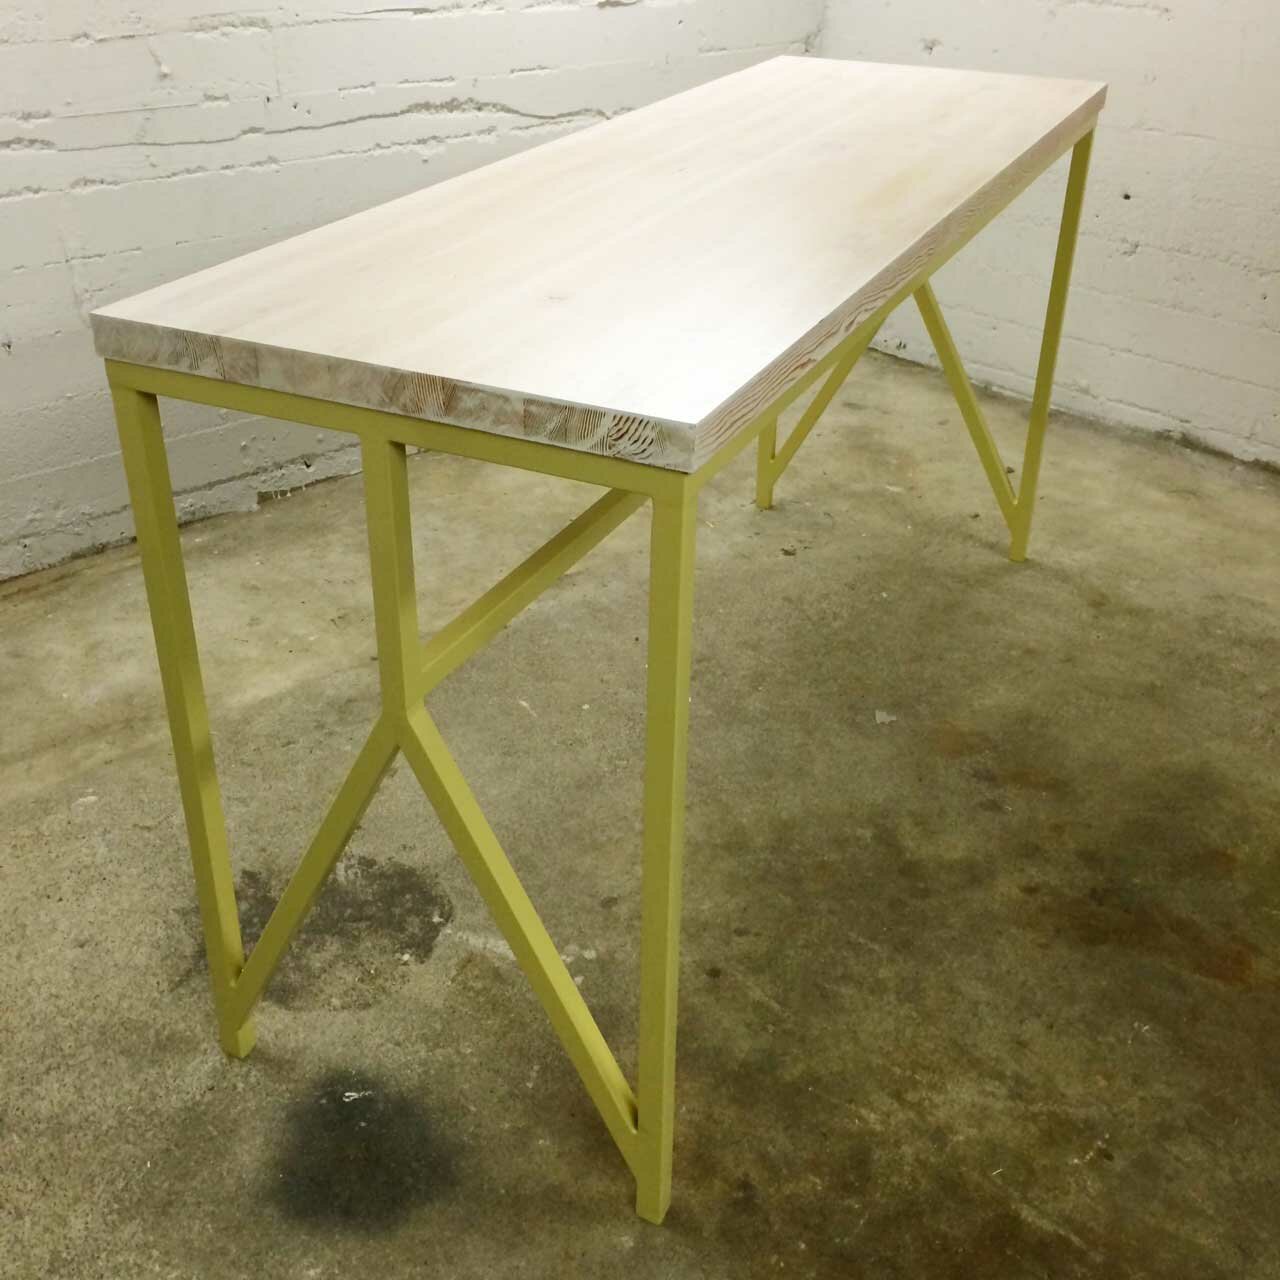 Steel Workbenches for Sale | Wooden Work Bench Kits | Metal Workbench